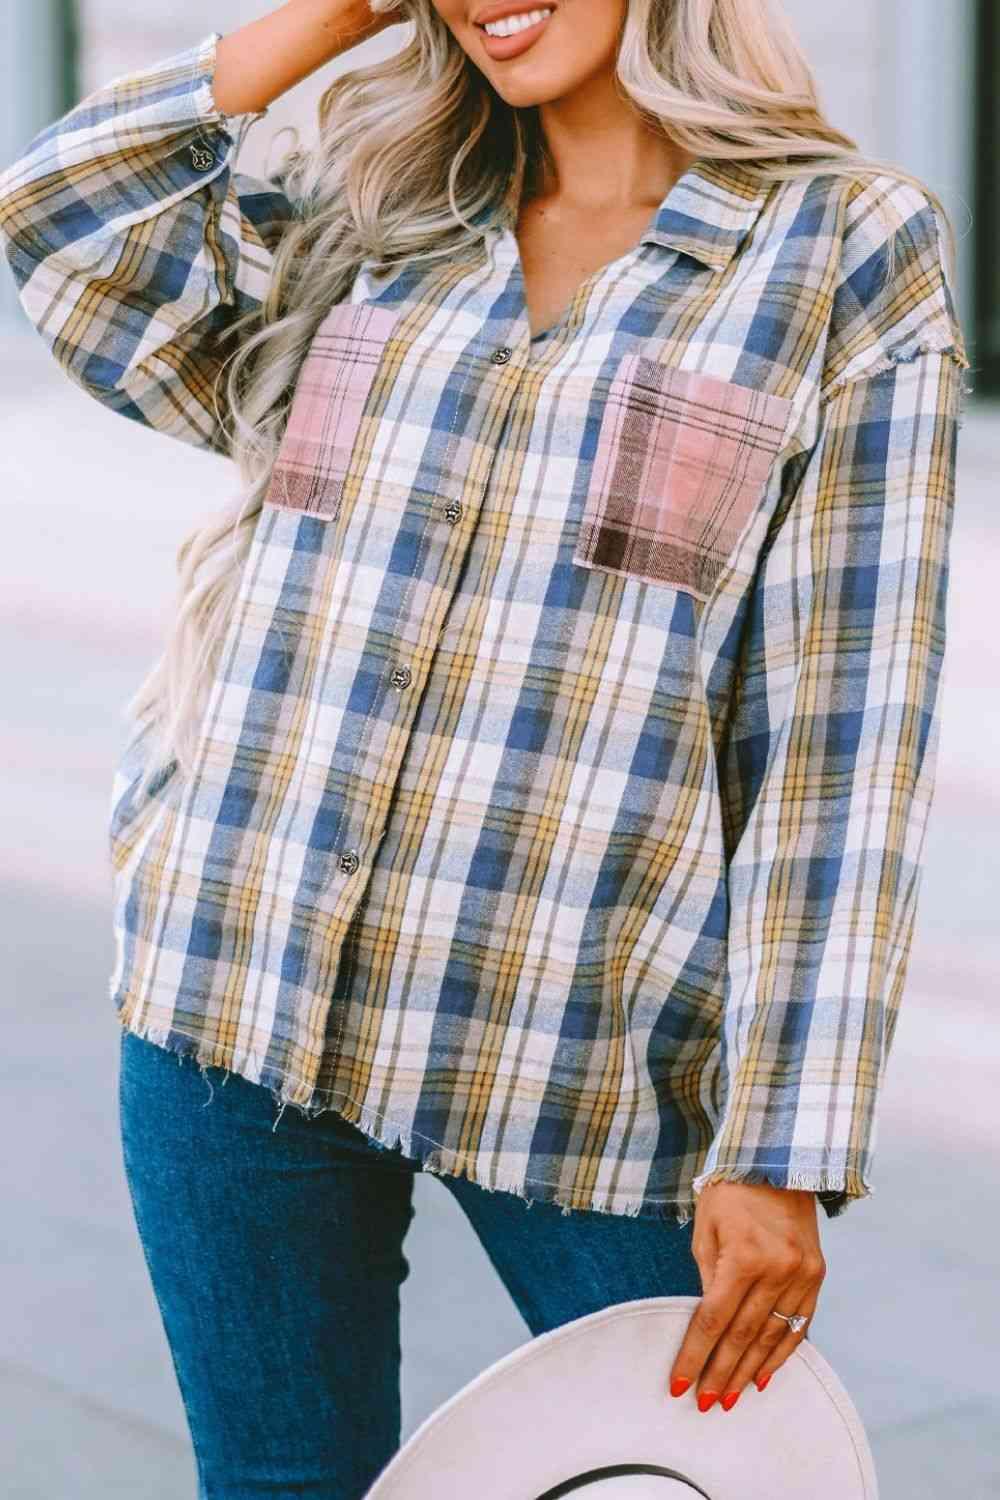 a woman wearing a plaid shirt and hat